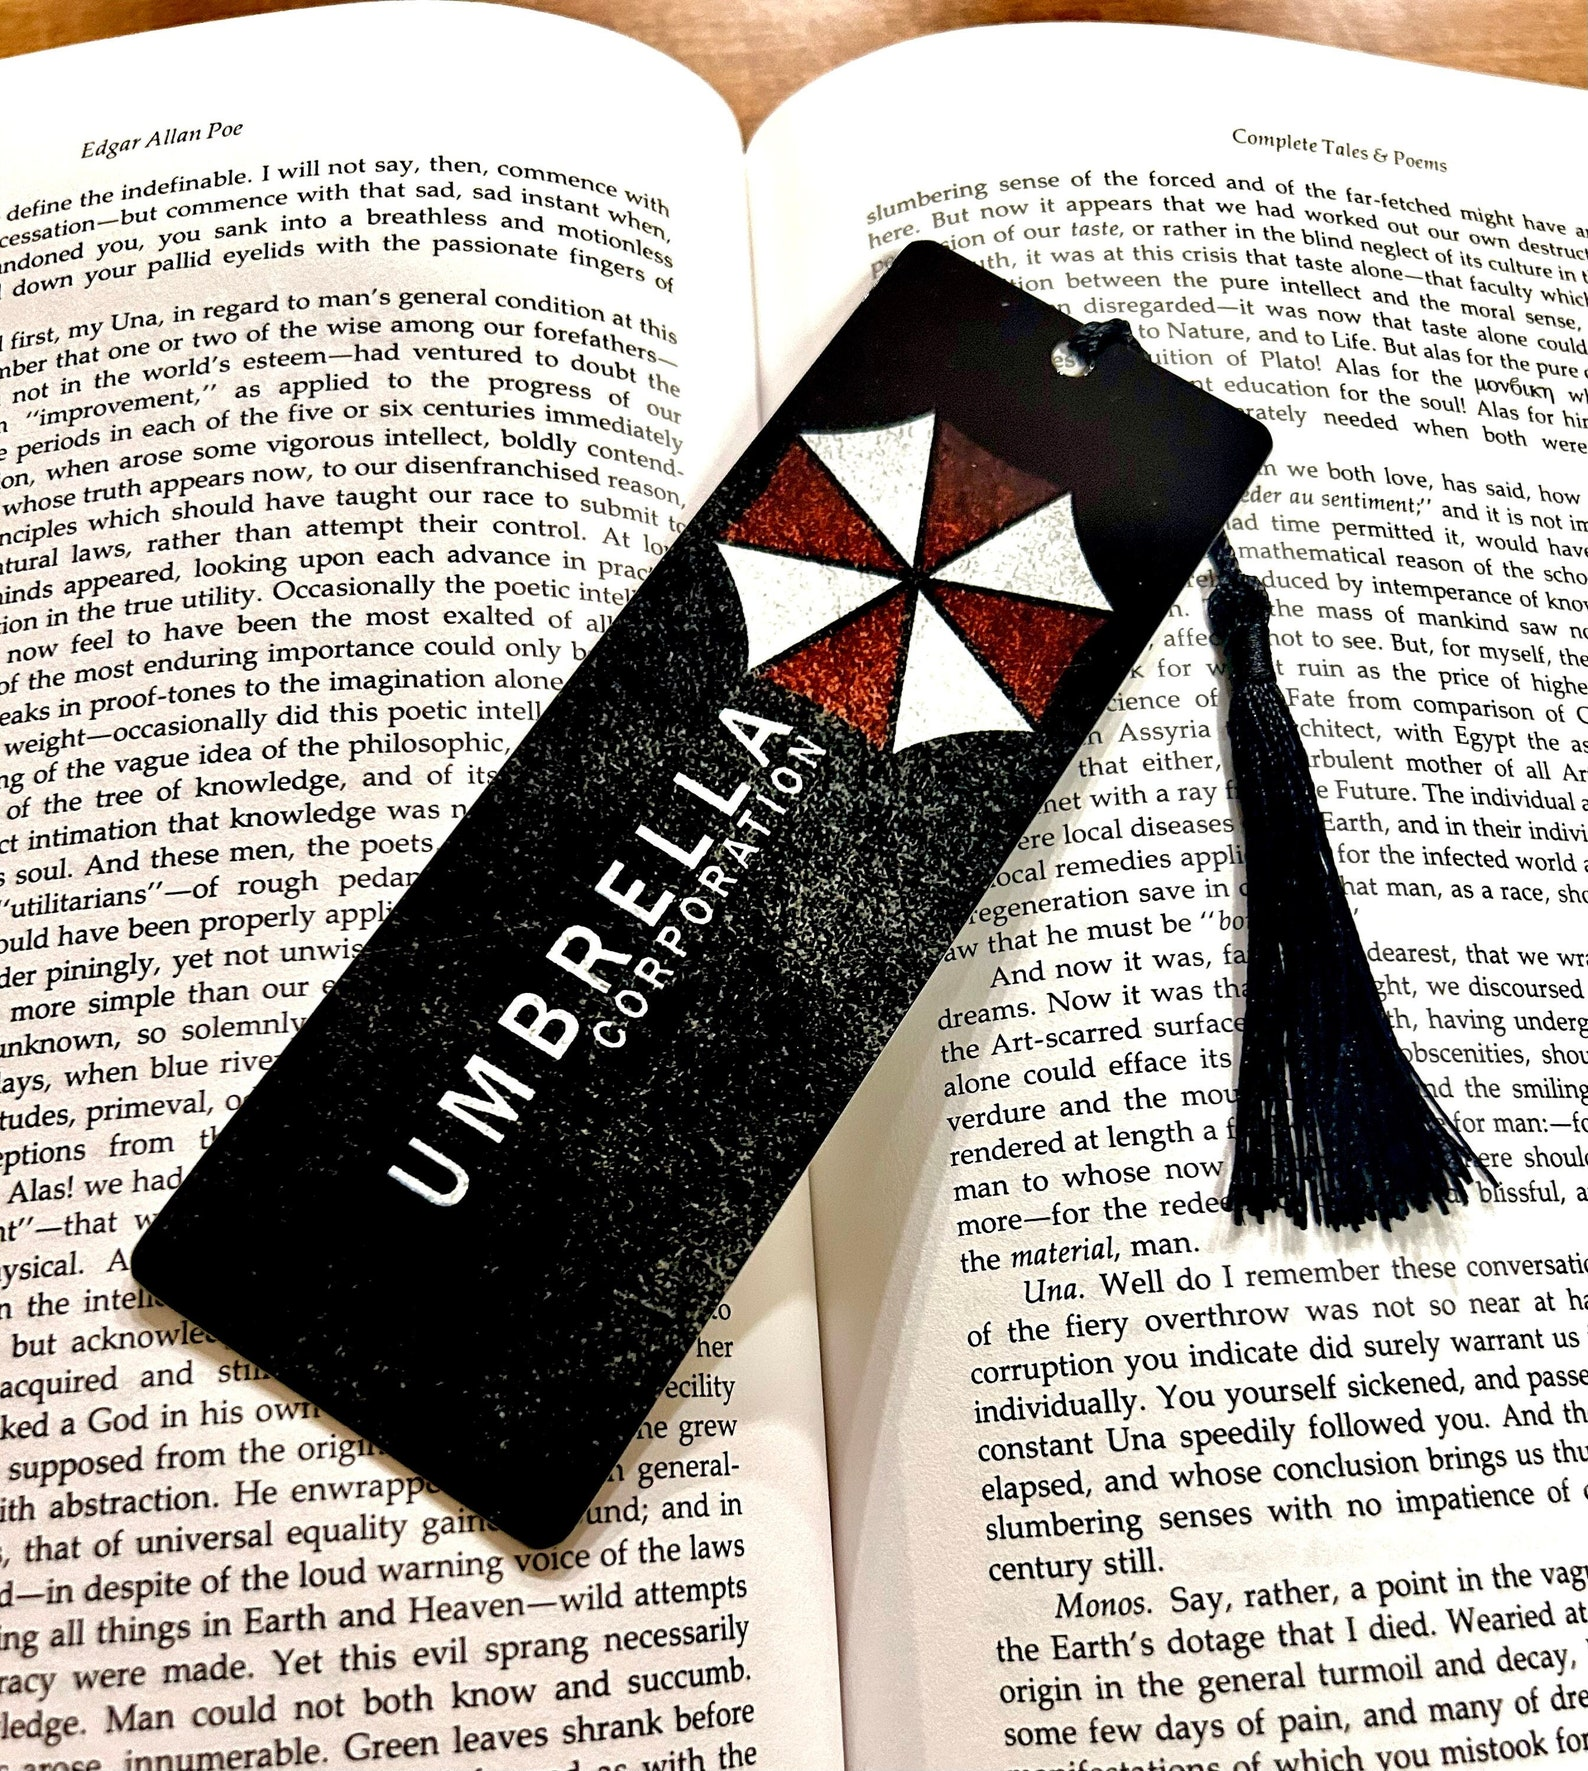 Bookmarks by Umbrella Corp.